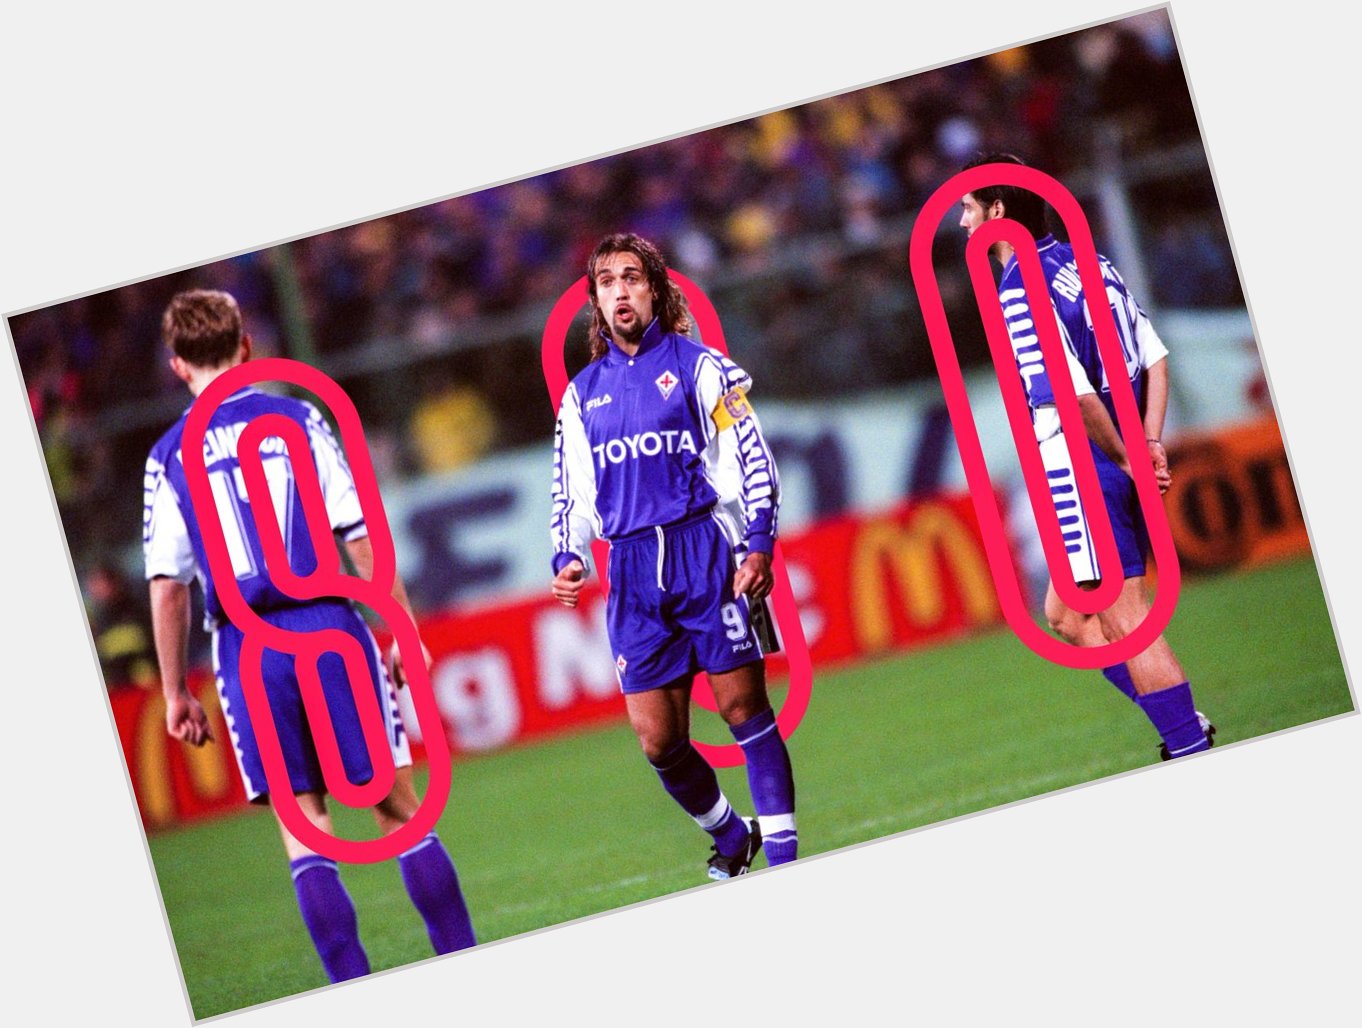 Happy birthday to Gabriel Batistuta. No one had a better career when it came to shirts. 